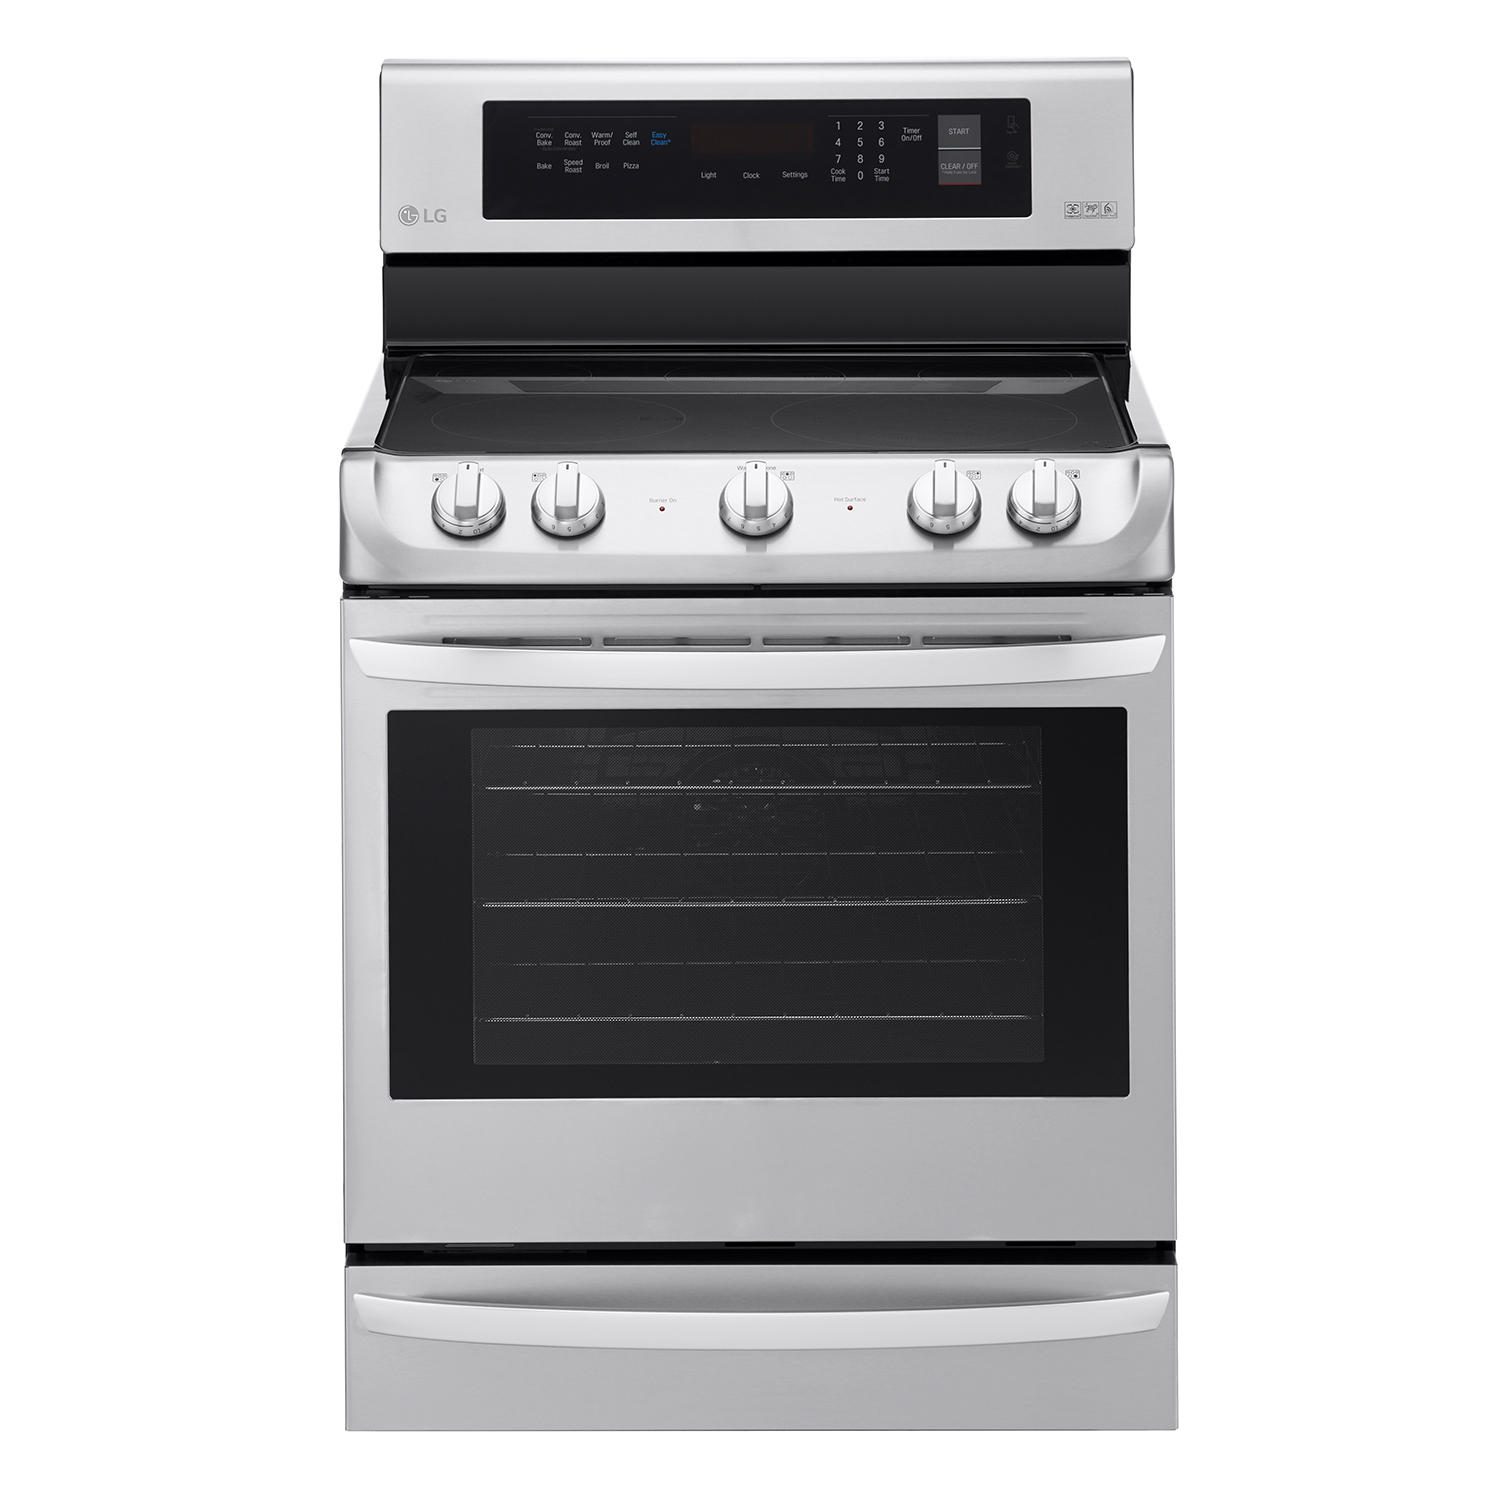 LG 6.3 cu. ft. Electric Single-Oven Range with ProBake Convection and EasyClean LRE4213ST in Stainless Steel Finish